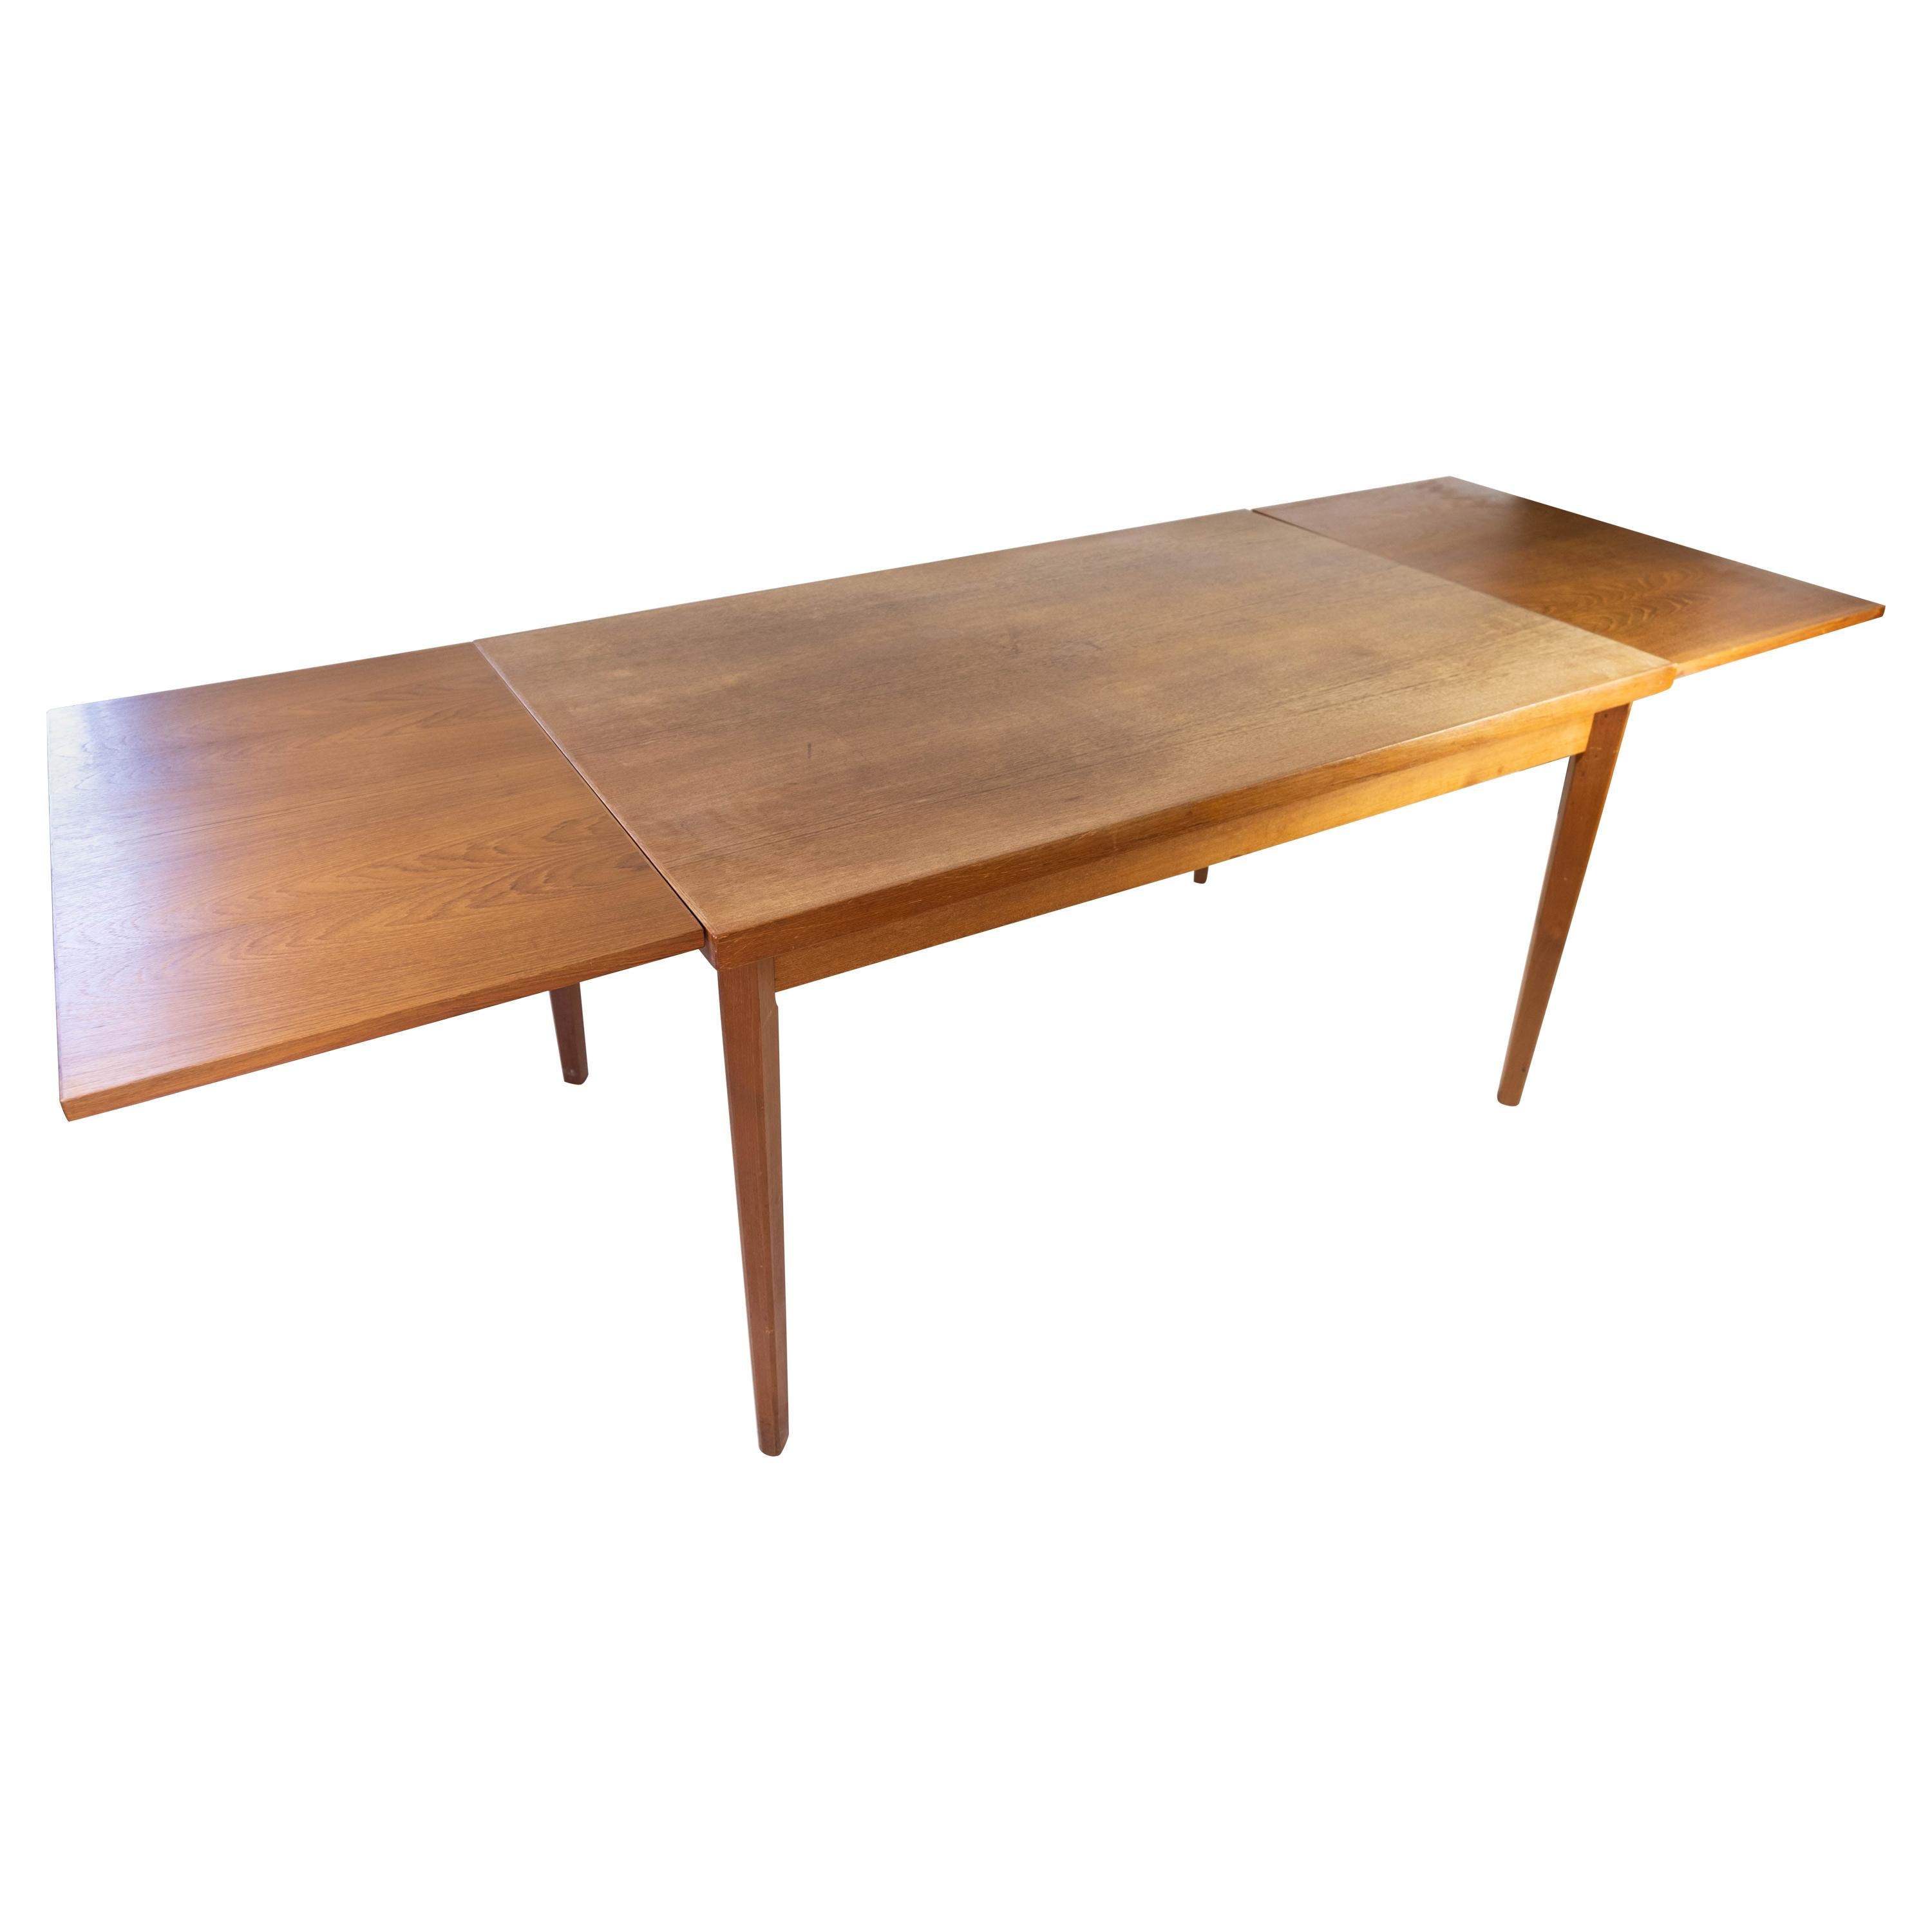 Dining Table with Extensions in Teak of Danish Design from the 1960s